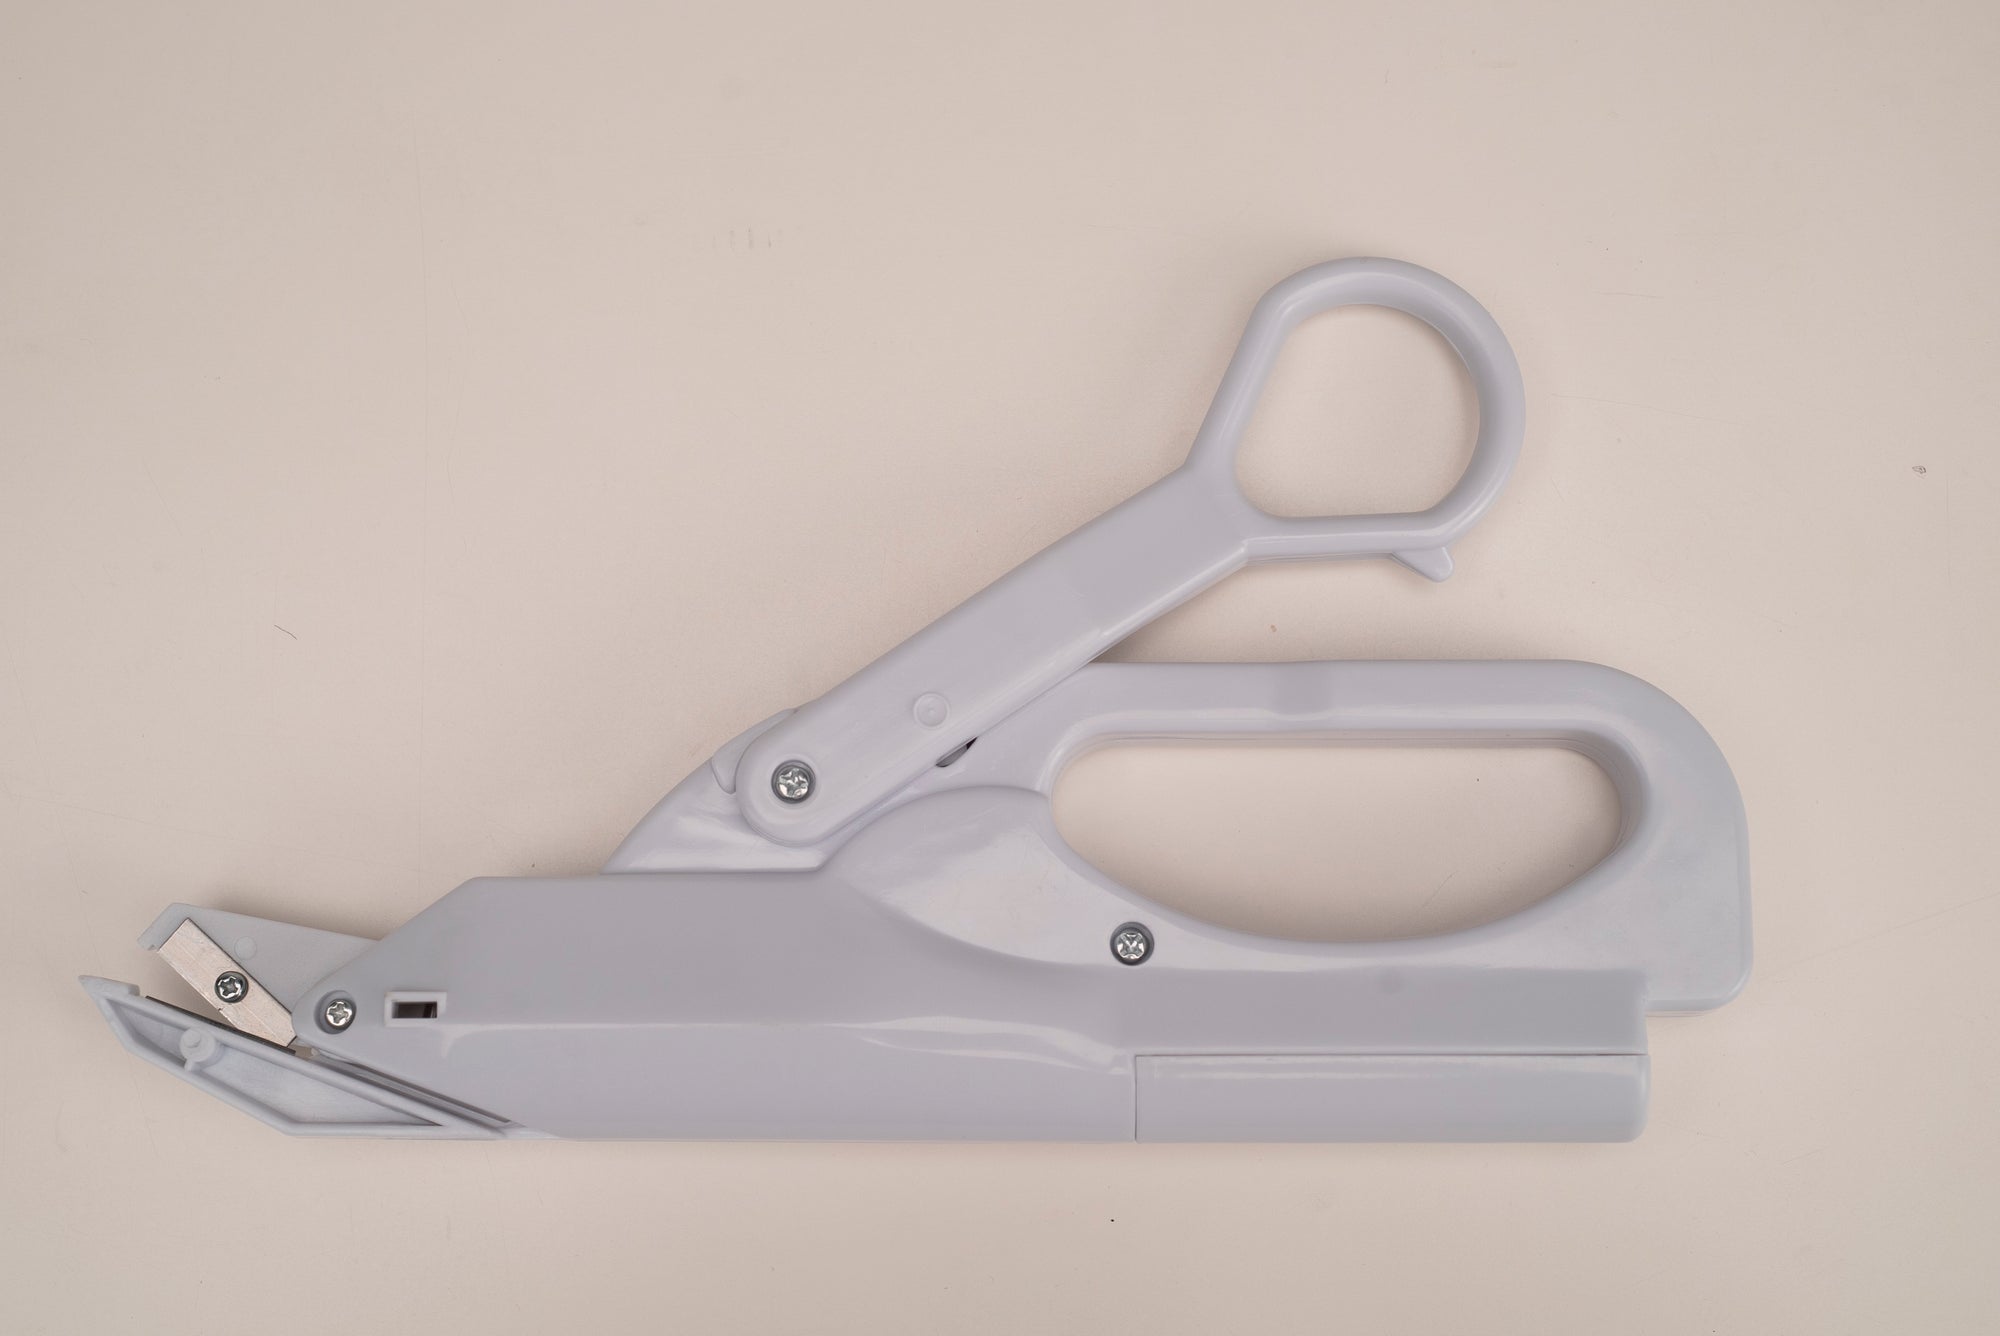 Battery-operated electric scissors FS-101 - Michley Tivax